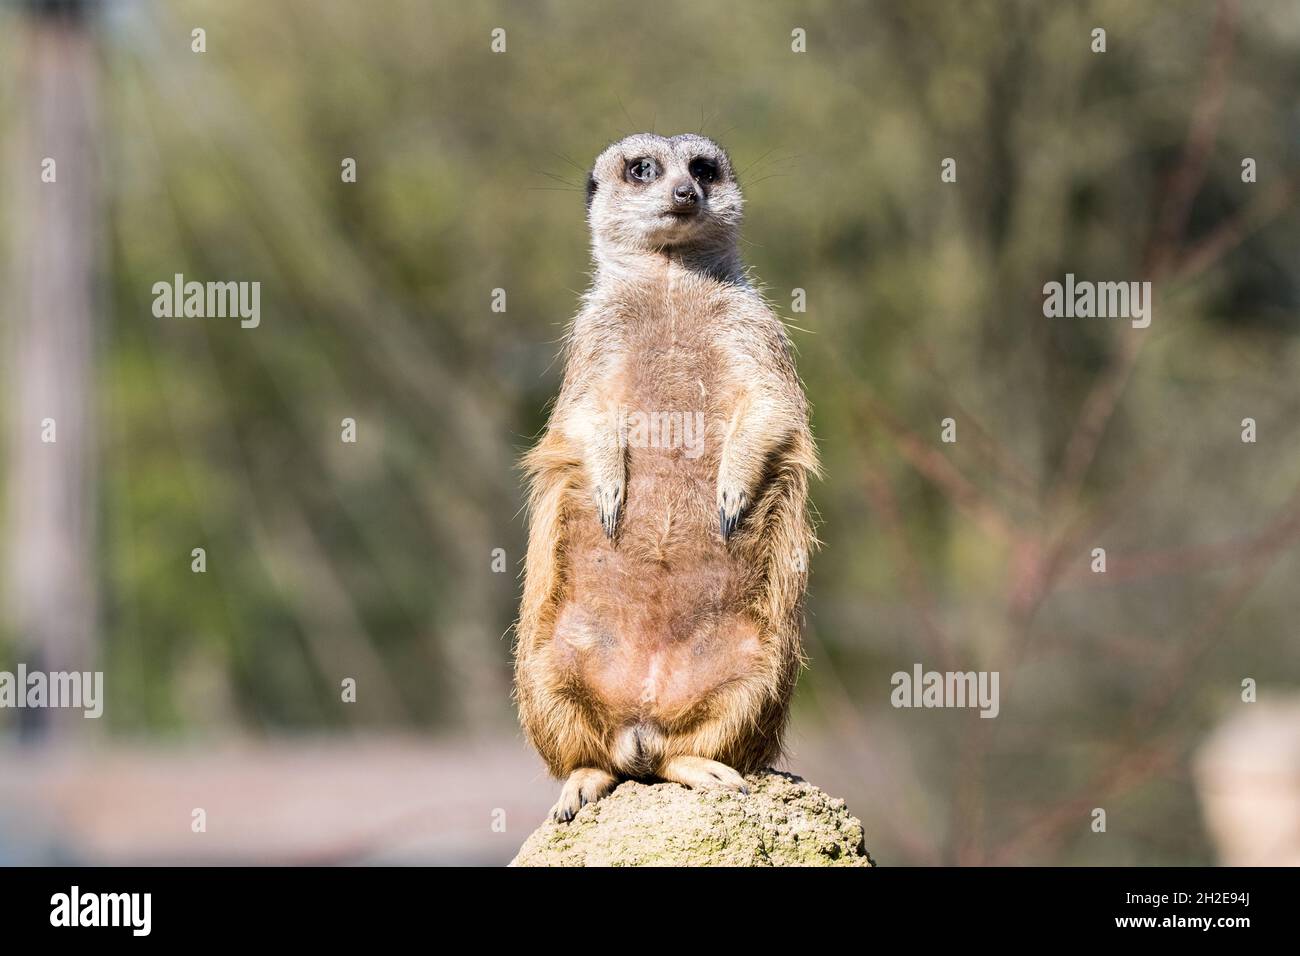 standing up suricate on a stone looking alert for danger Stock Photo